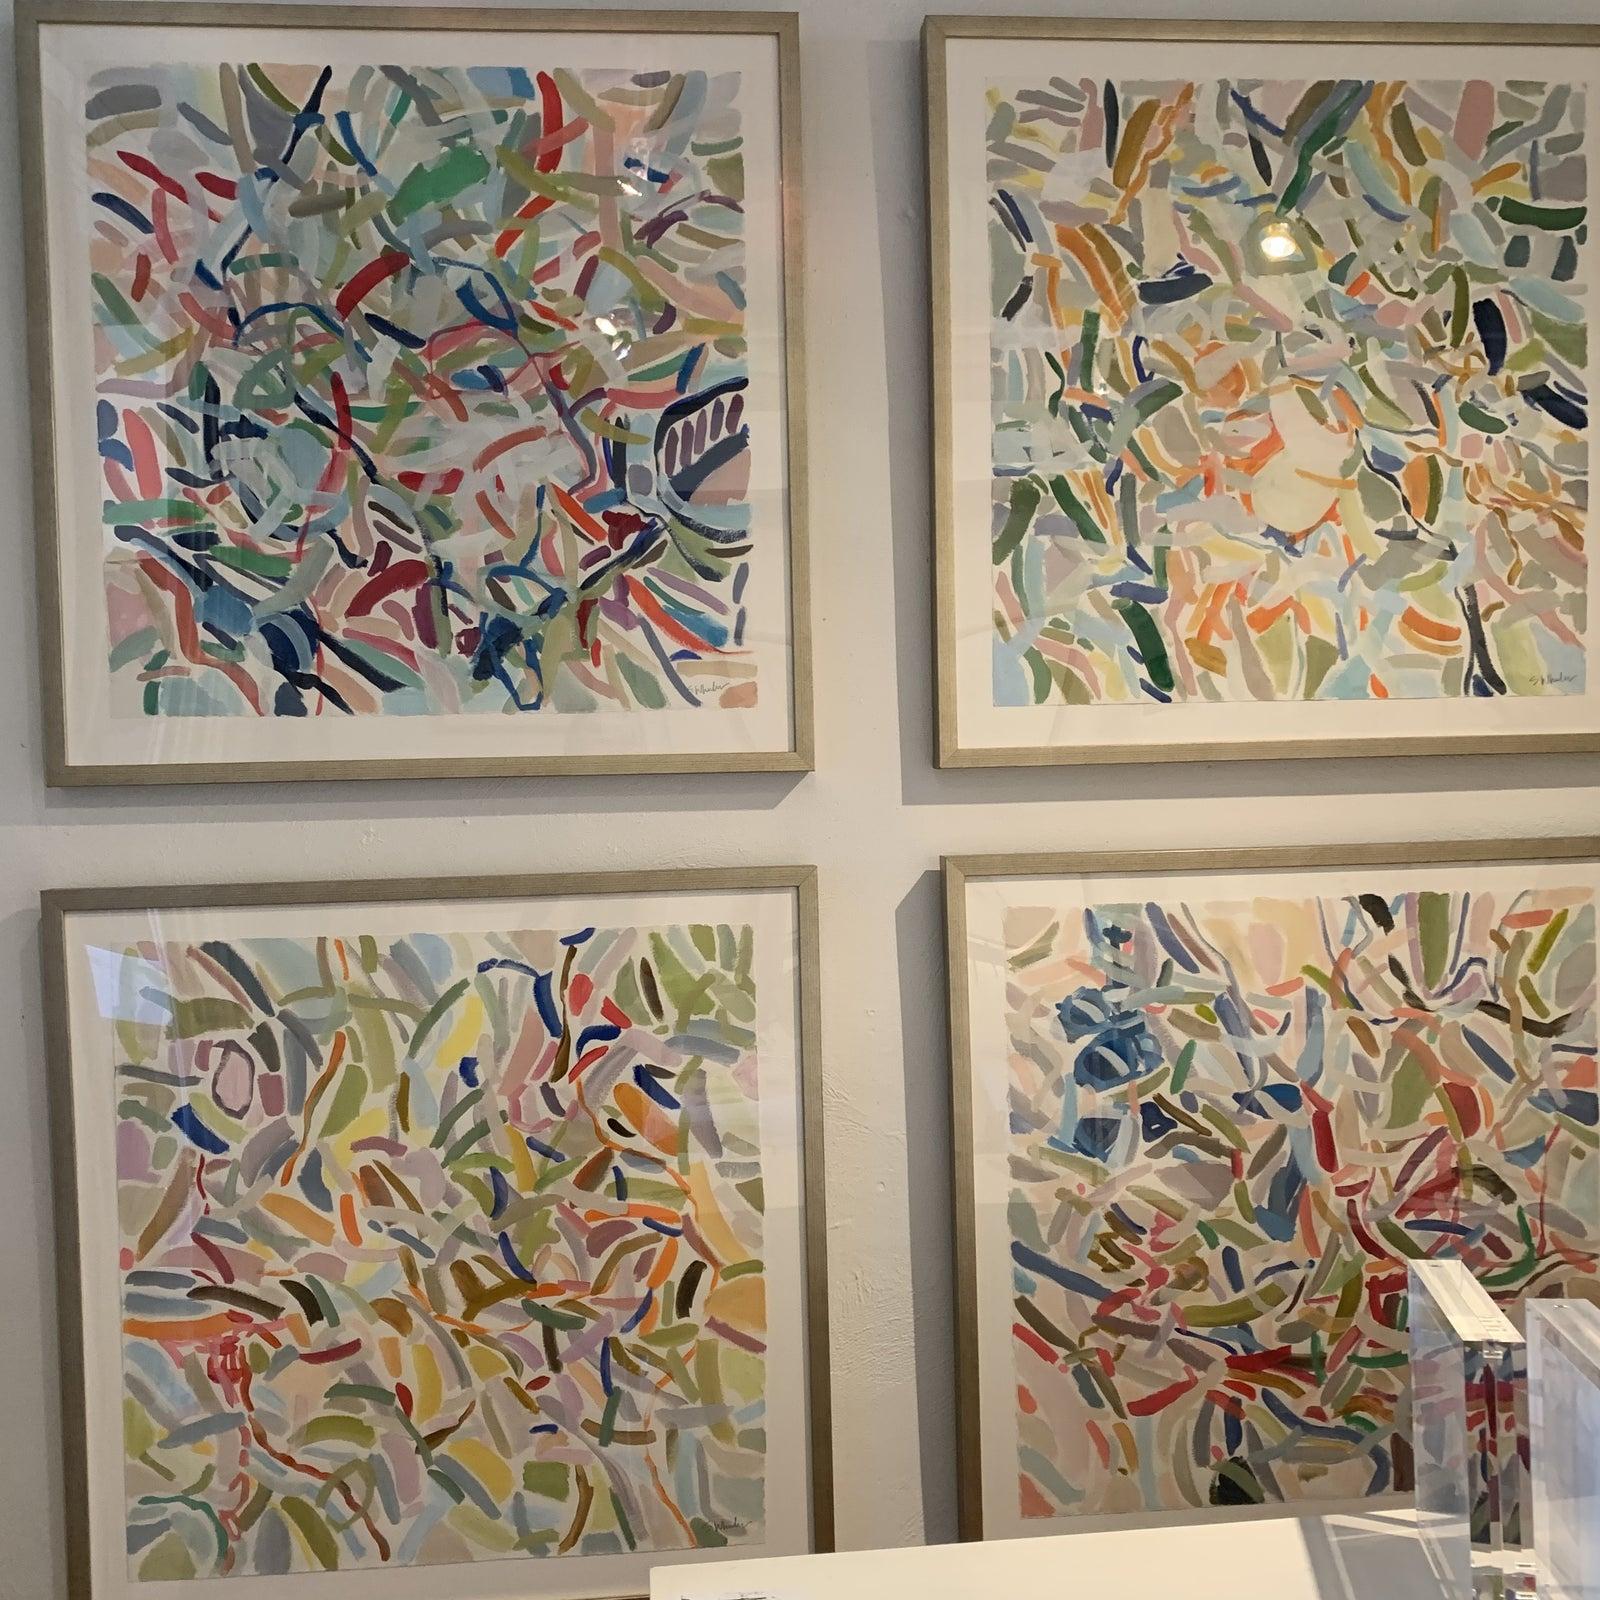  silver framed colorful abstracts by Stephanie Wheeler.
Signed on the front right - Oil Painting on Italian paper
Plexiglass fronts

Blues, Greens , Pinks and more!! 